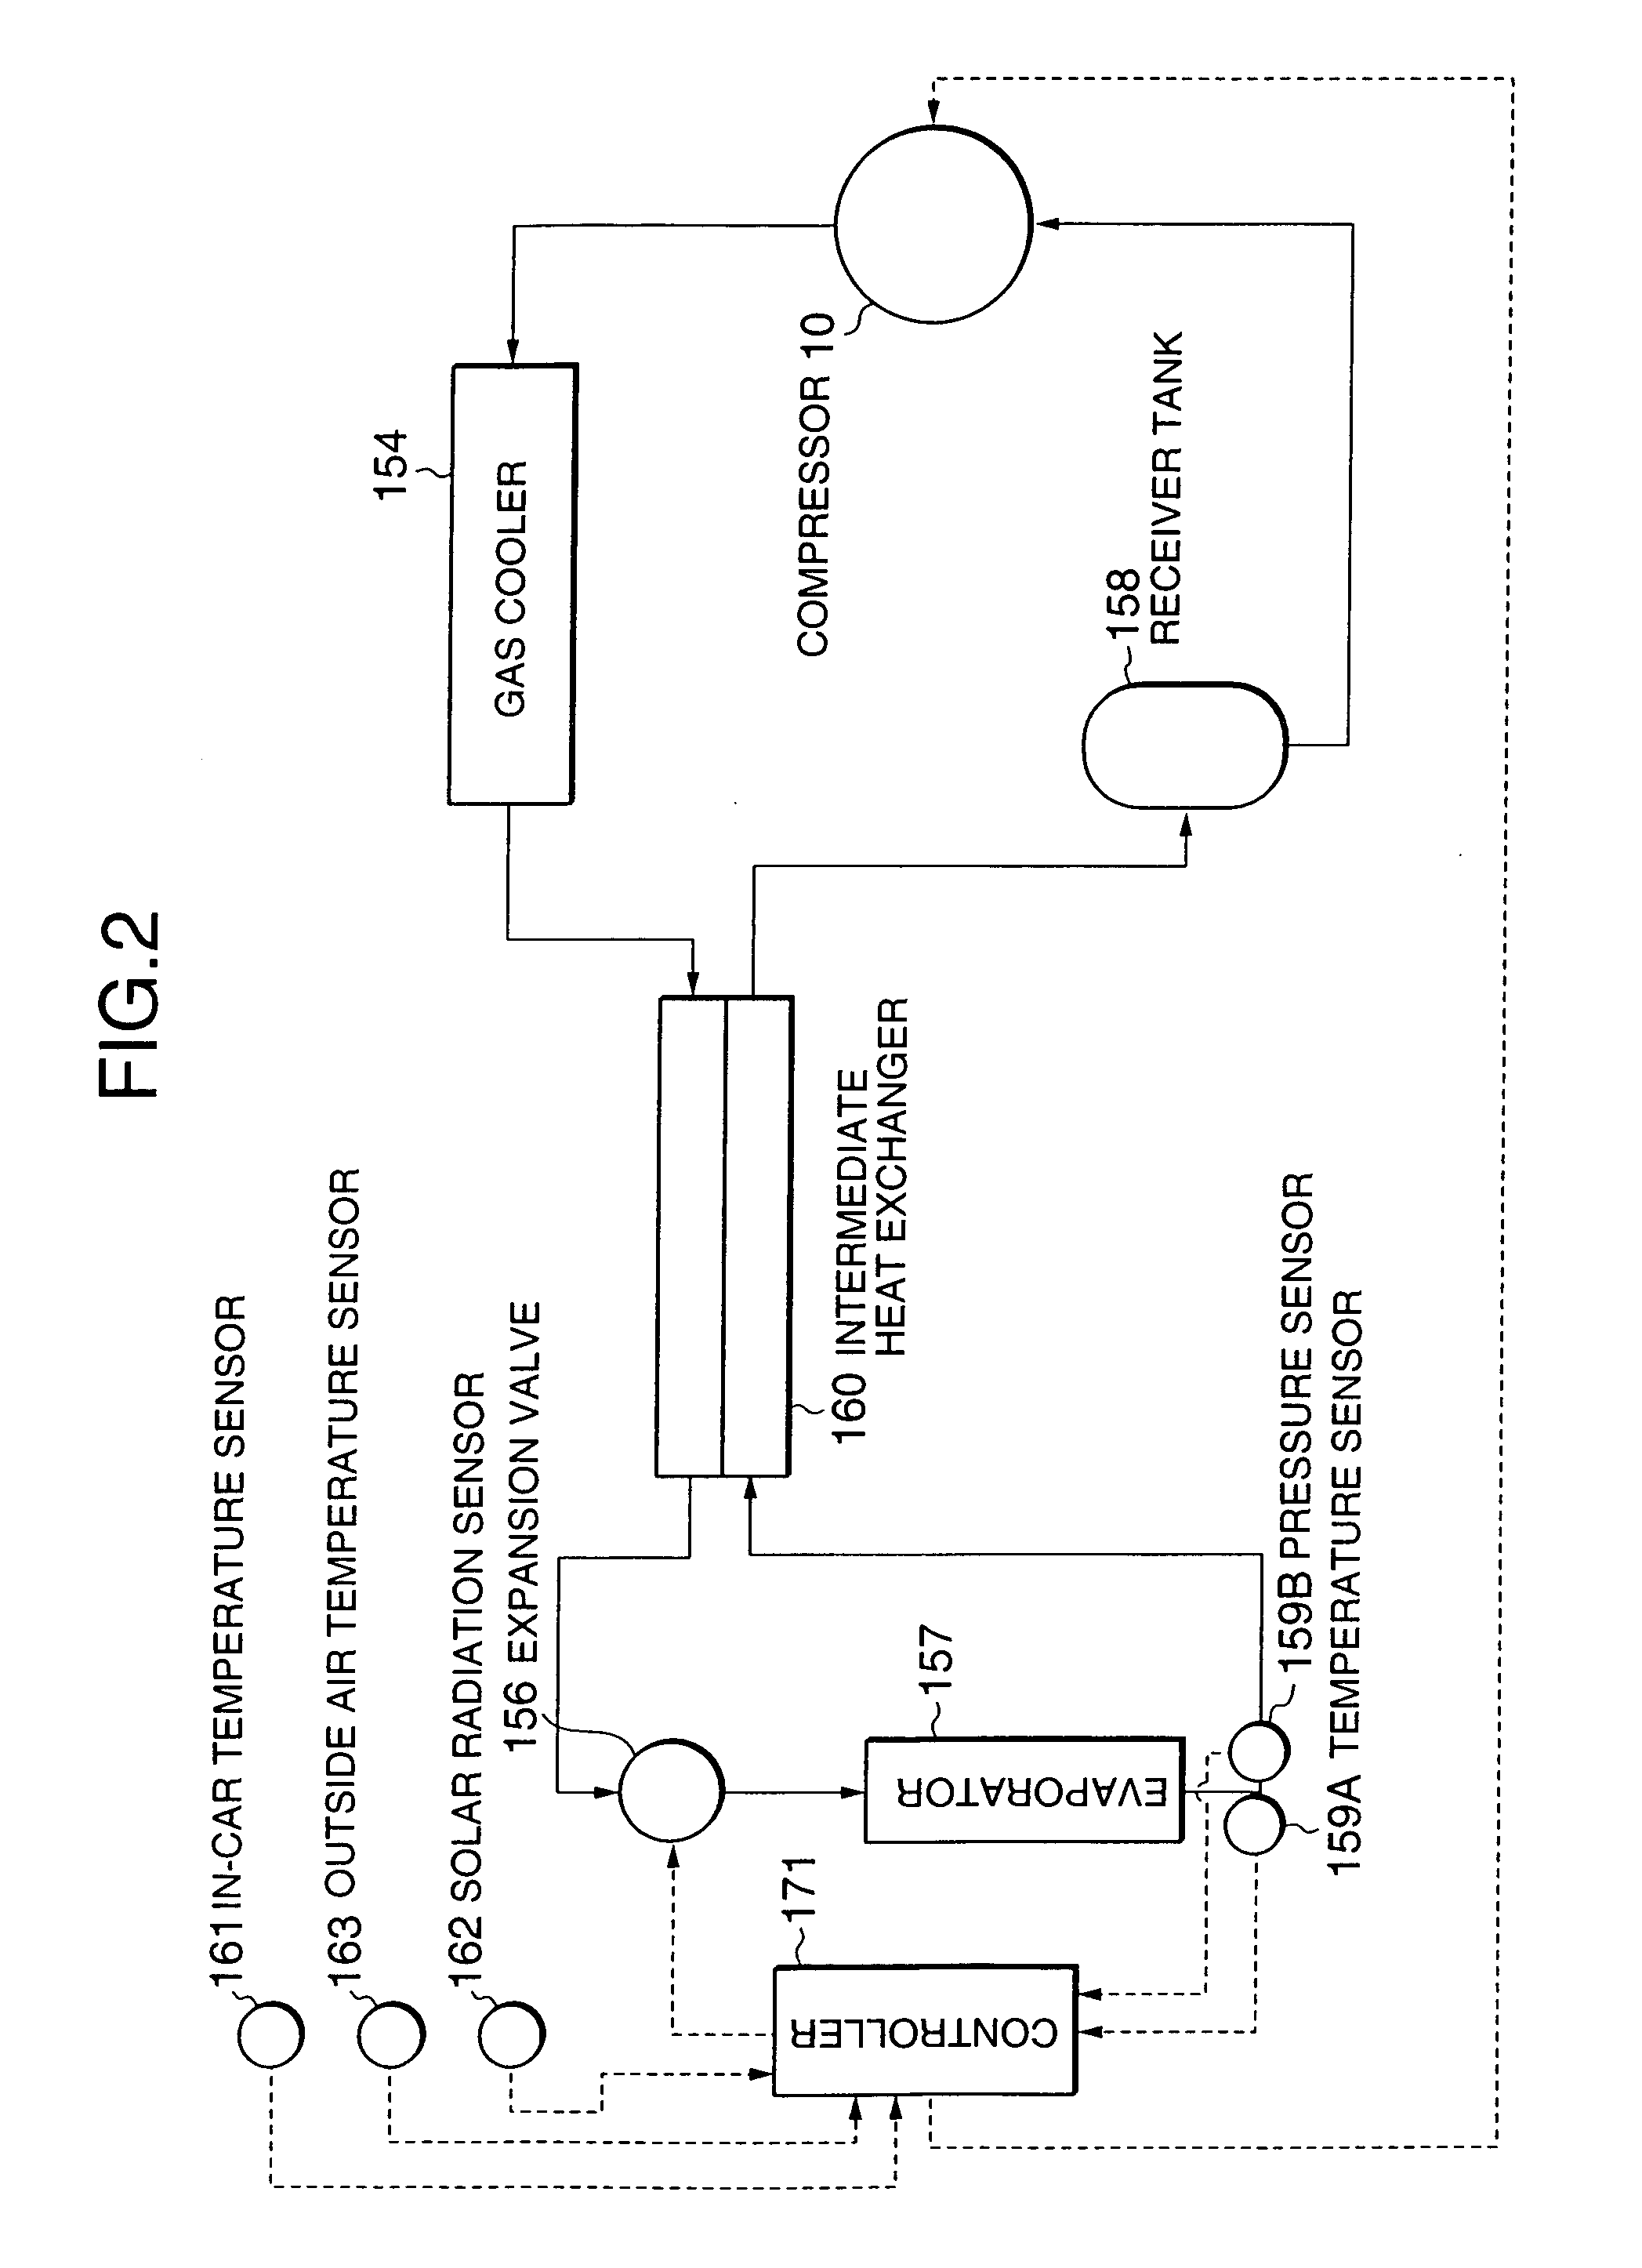 Supercritical refrigerant cycle system